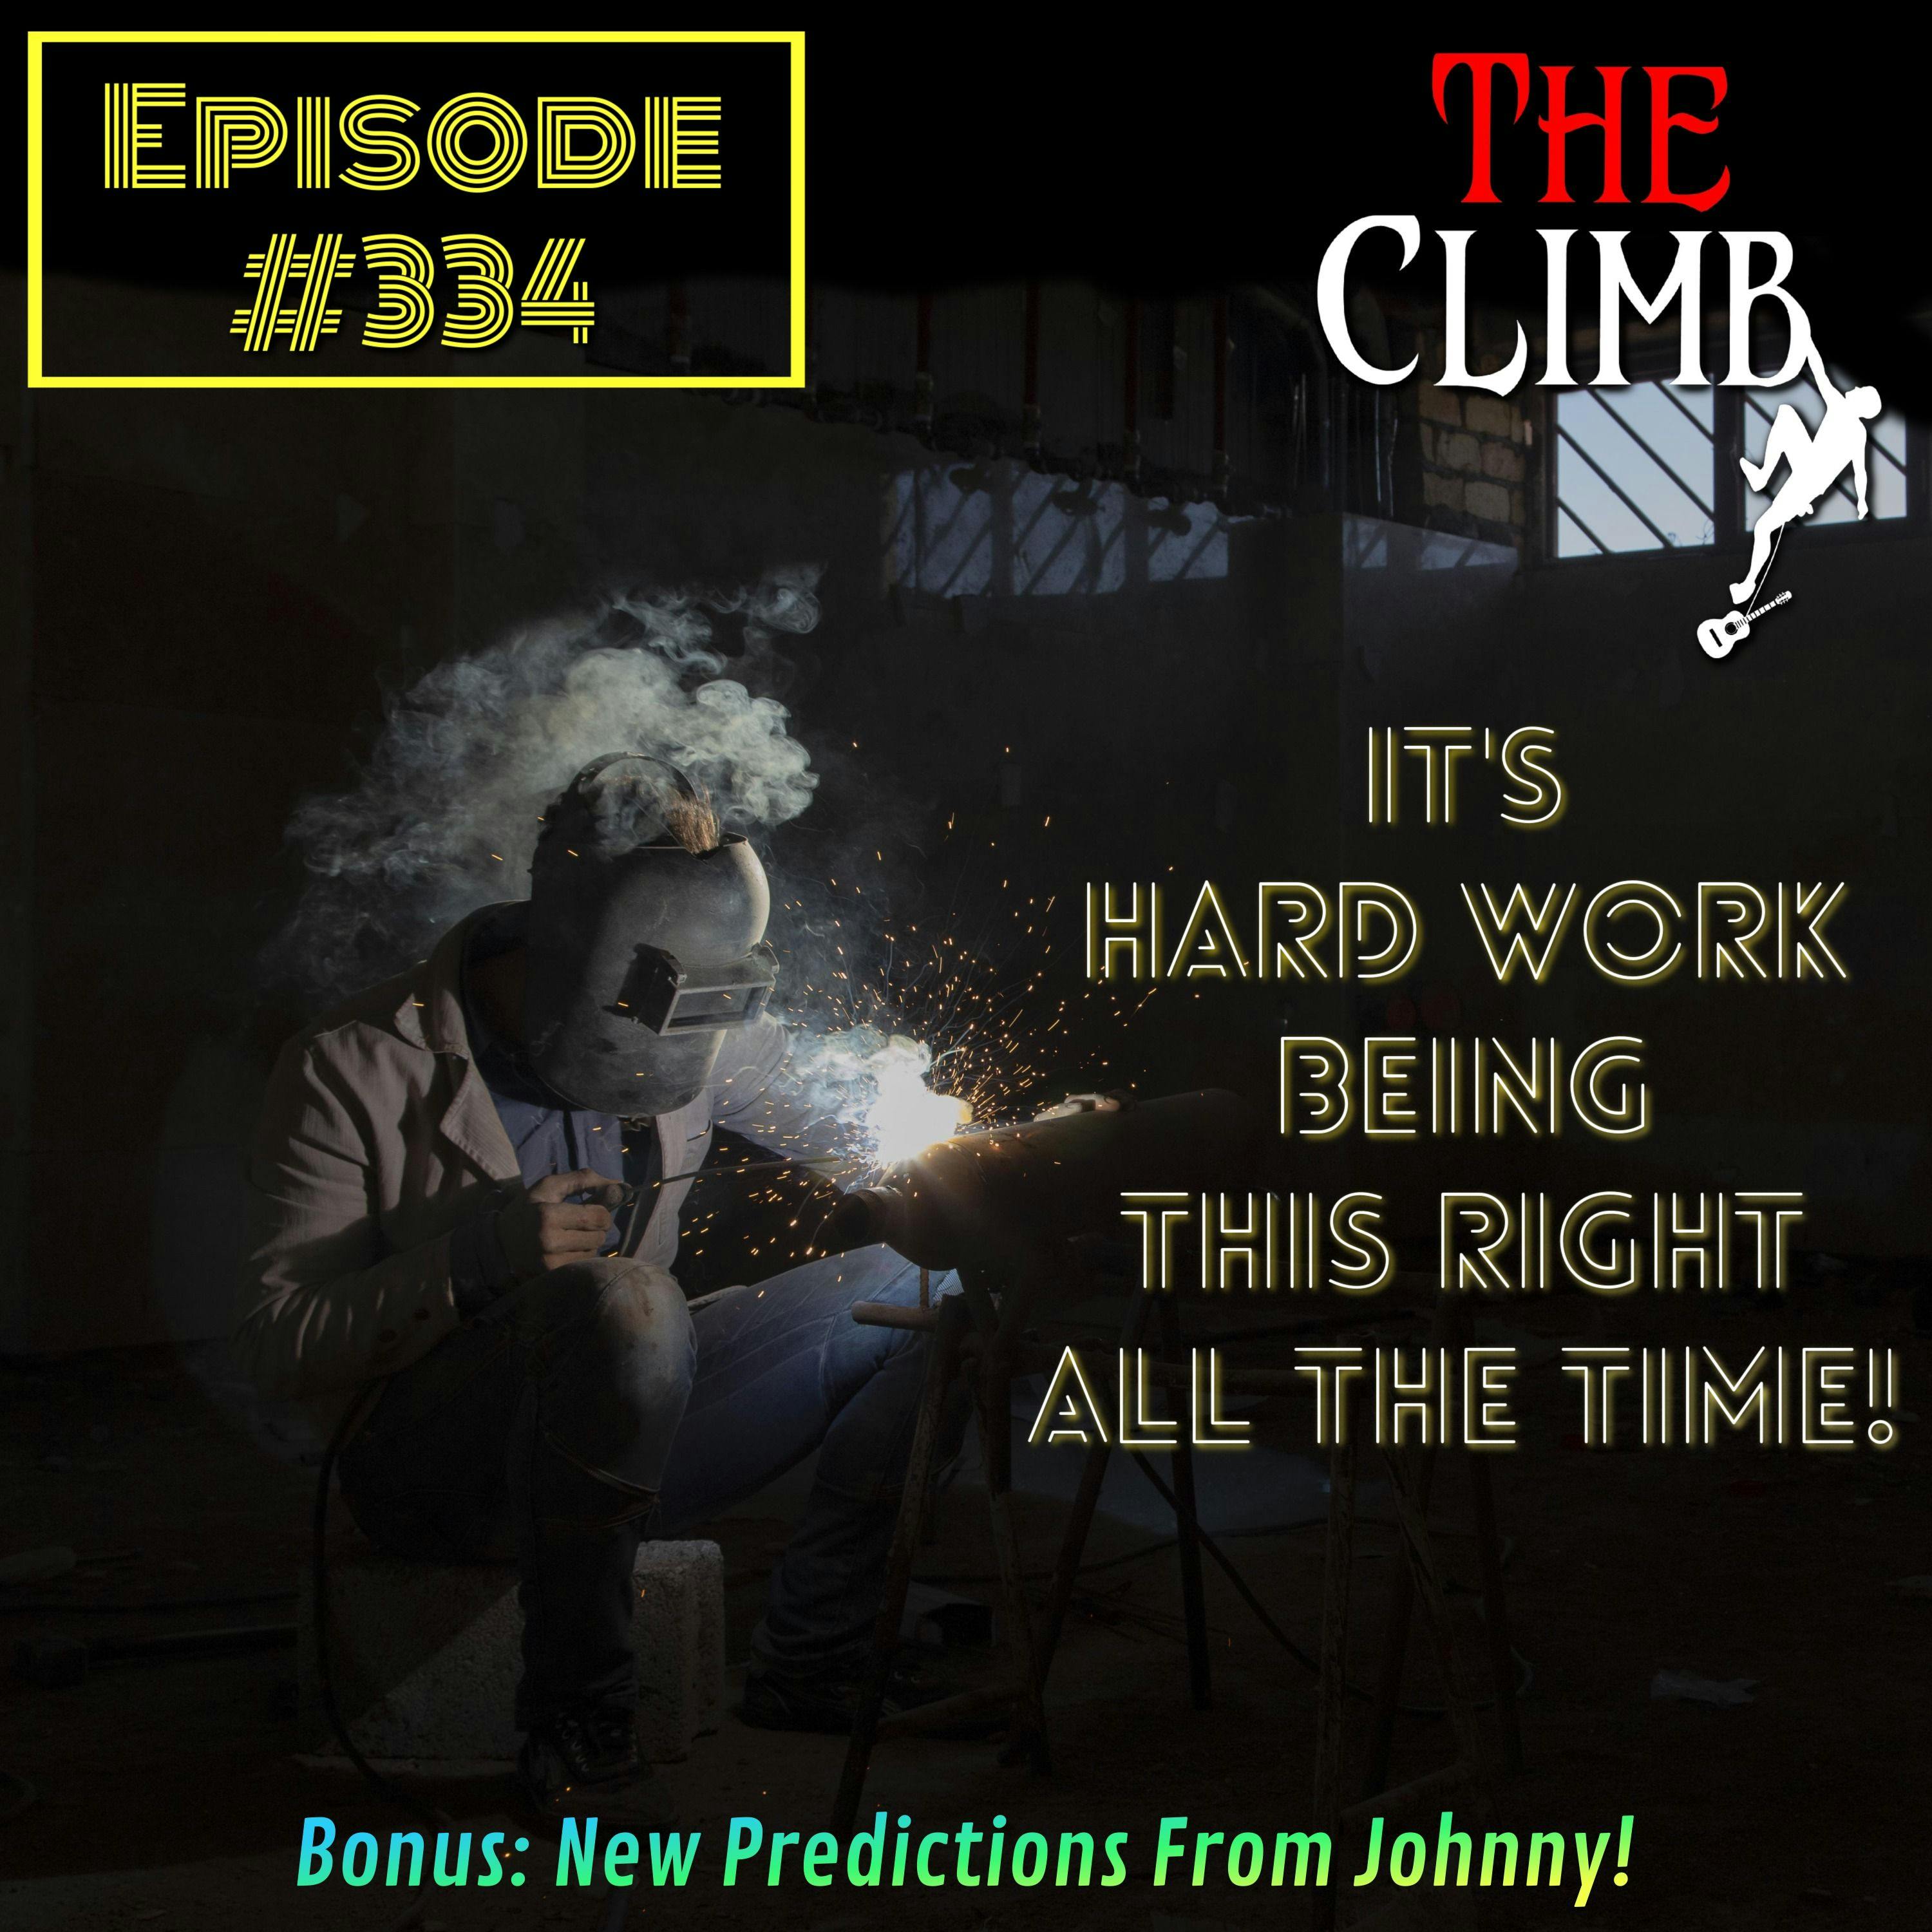 Ep 334: It’s HARD WORK Being This Right All The Time!